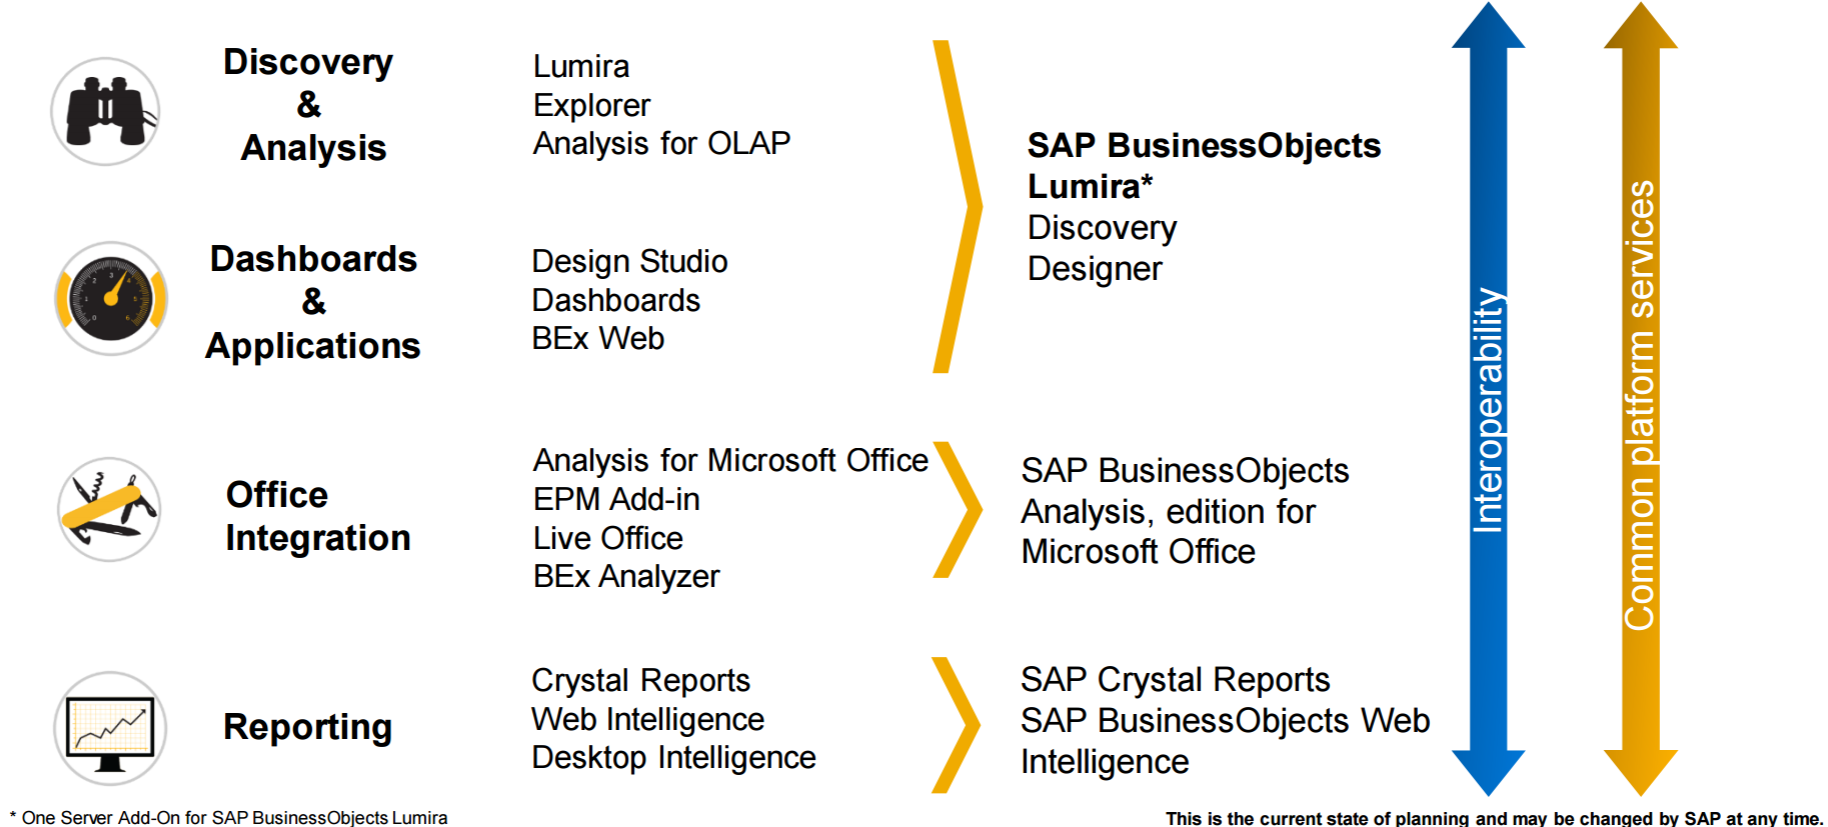 sap business objects